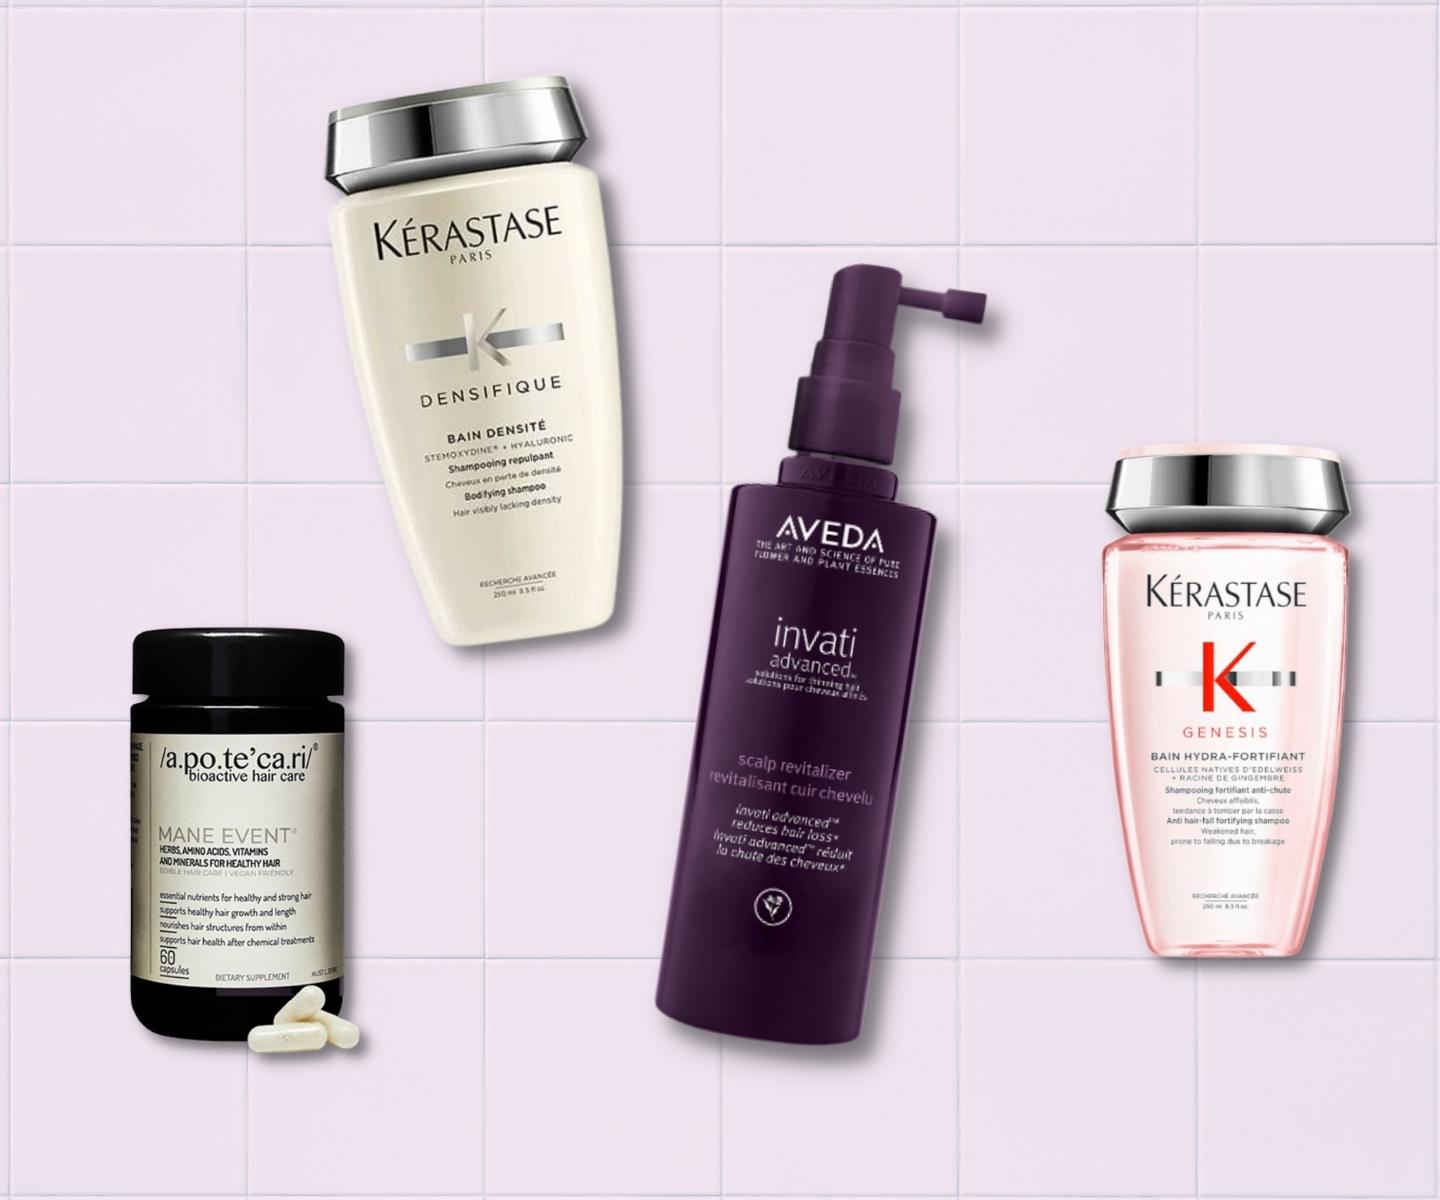 Do Hair Loss Products Work? We Asked a Hairstylist to Find Out